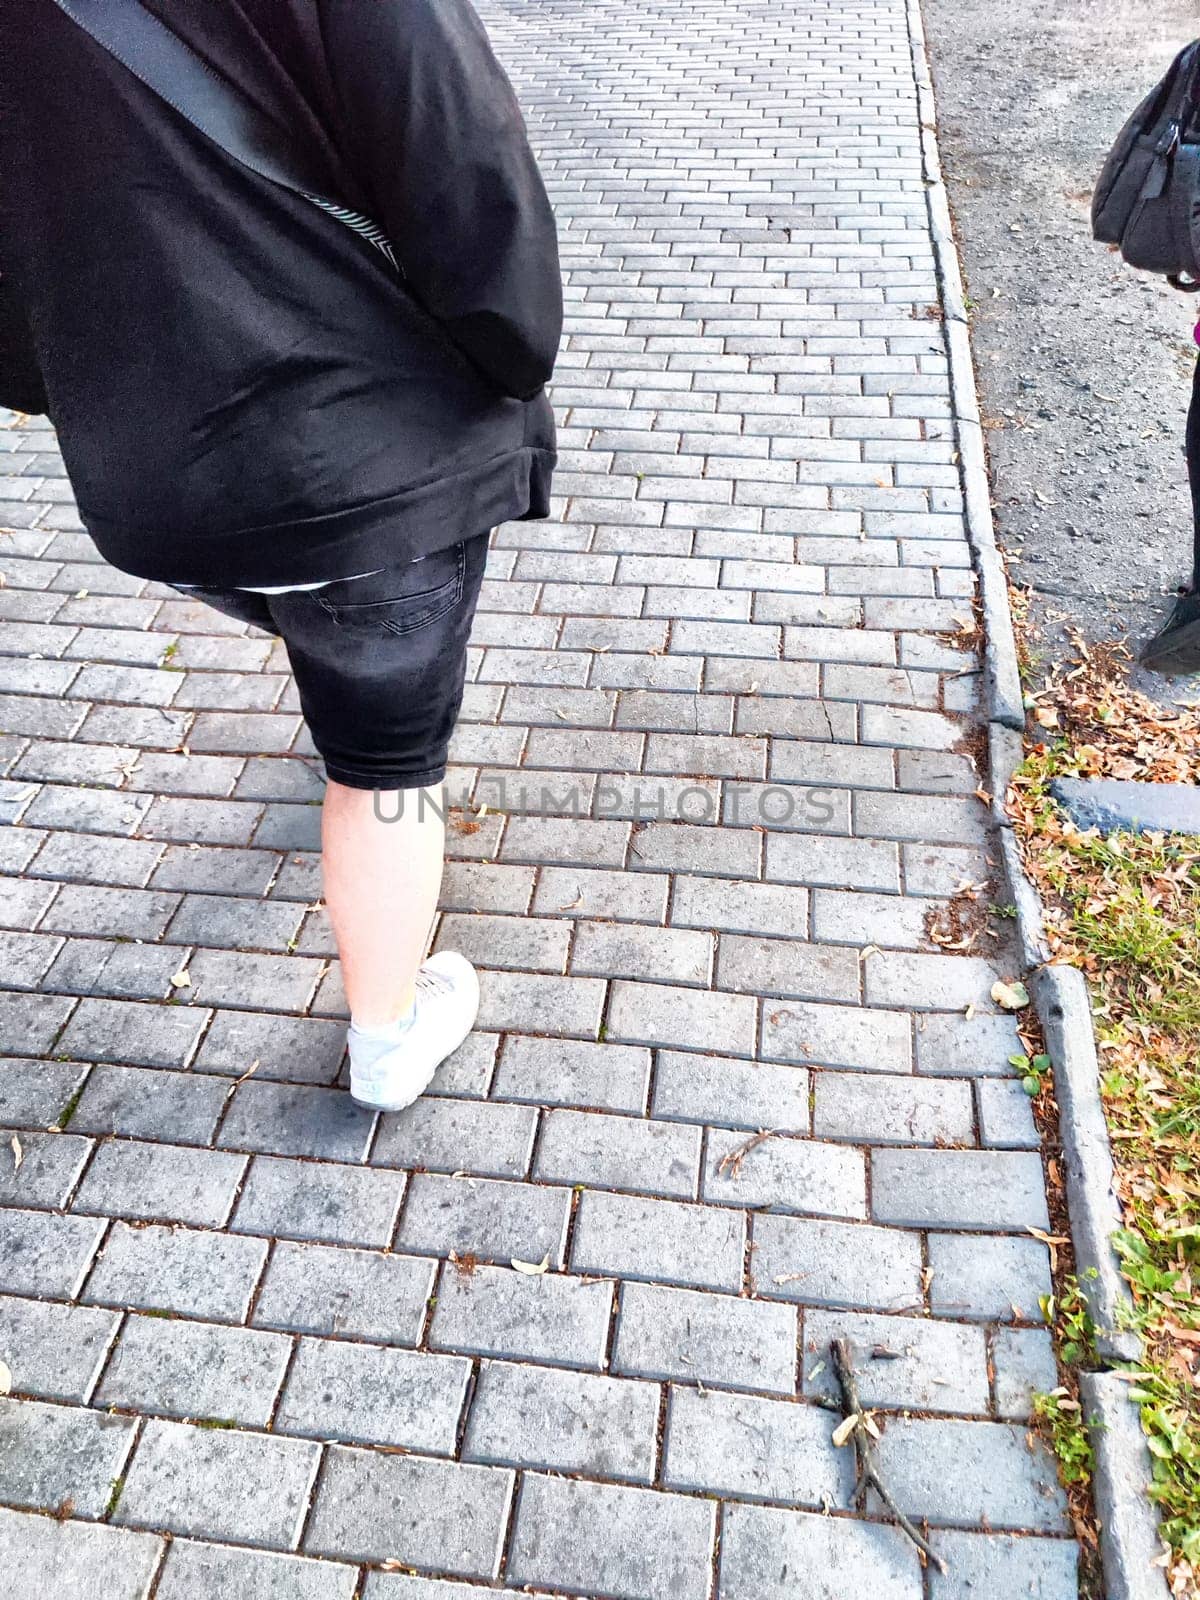 Person walking on a brick-laid path in the evening. Casual Stroll on Cobblestone Sidewalk at Dusk by keleny